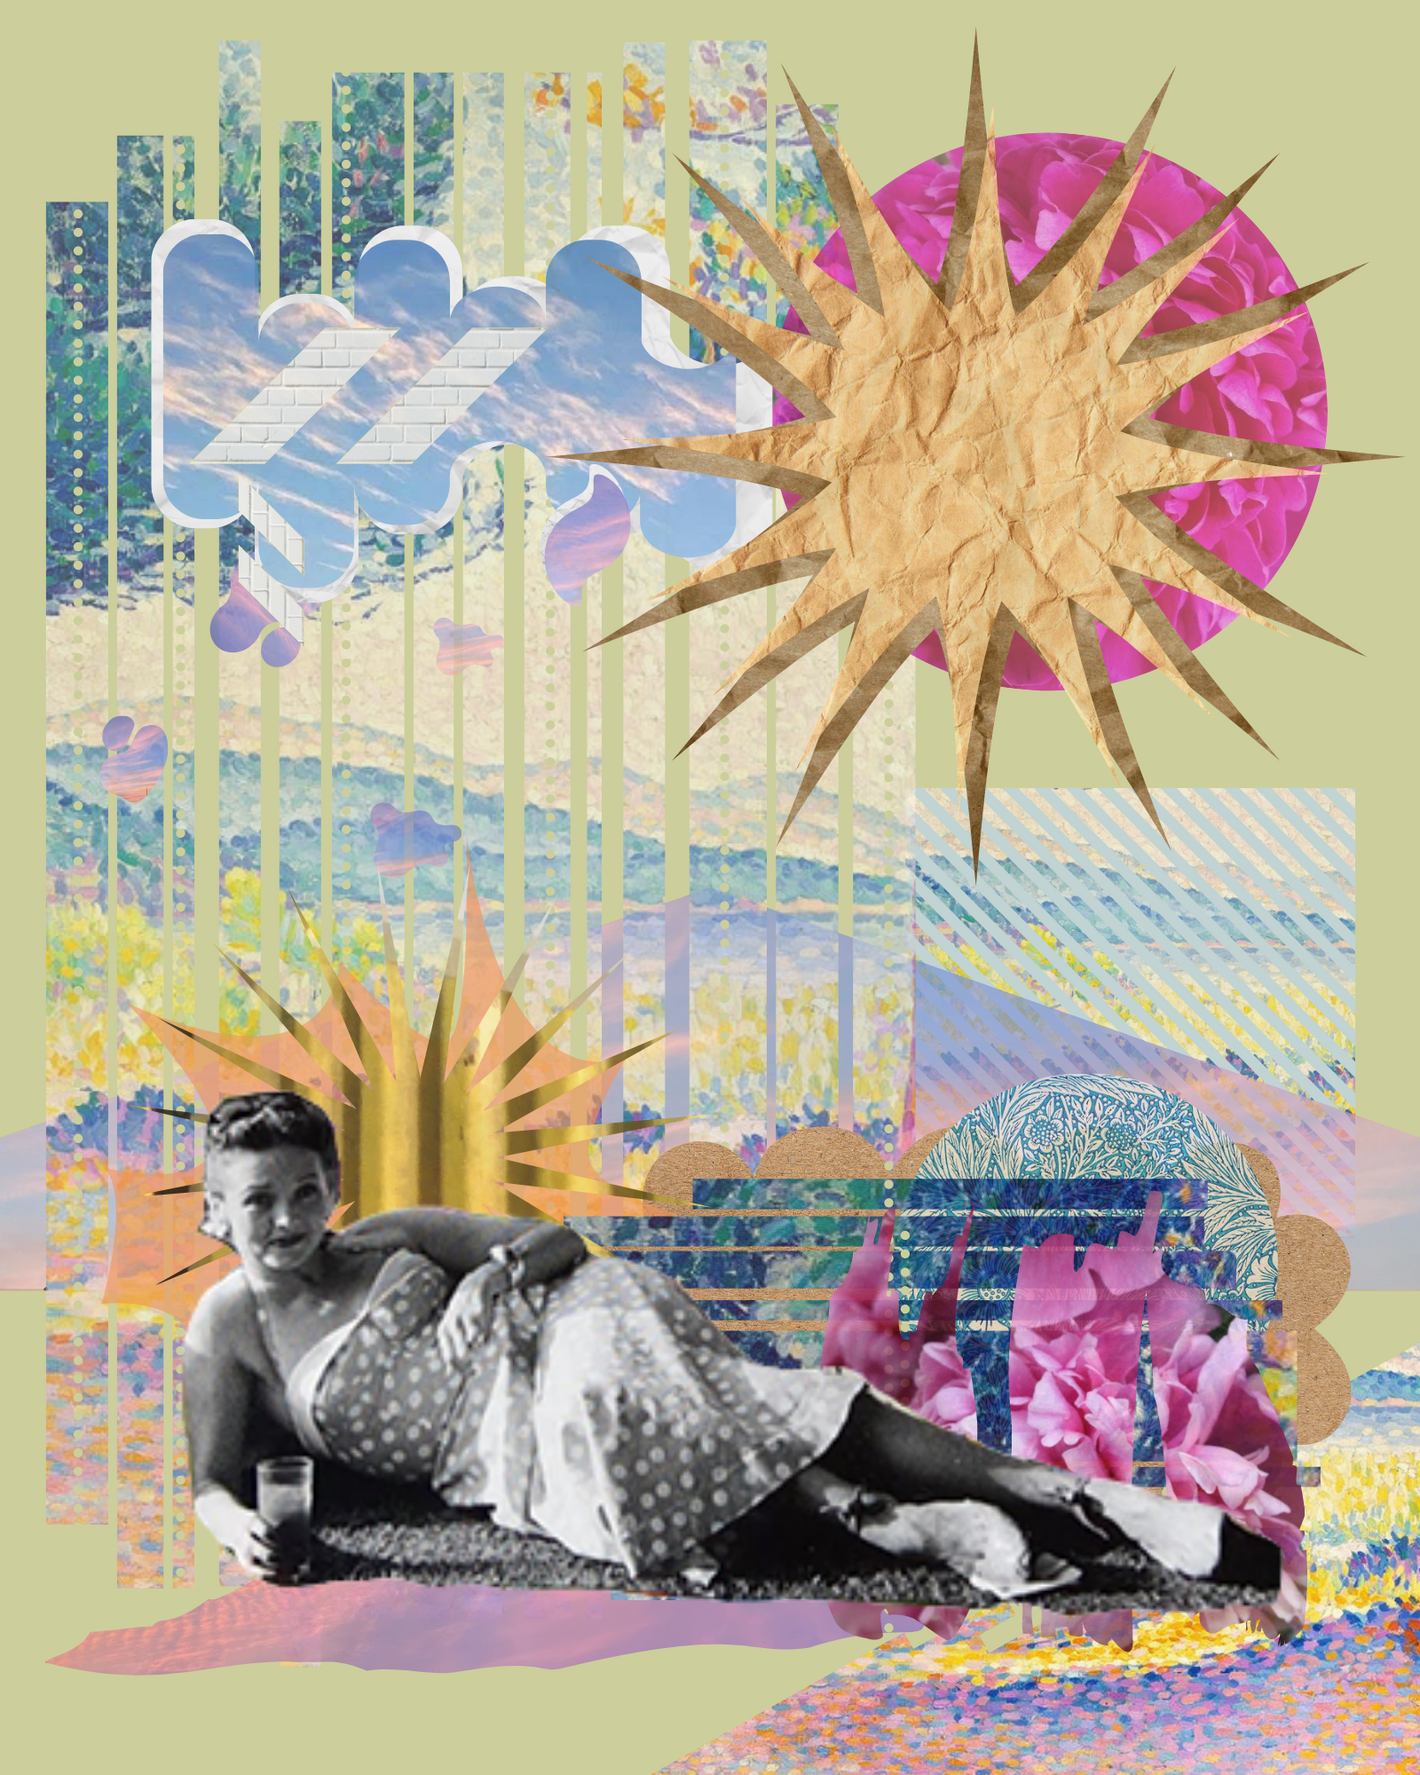 "Love Today" digital collage of a woman sitting in the grass with a drink. There is a sun and some clouds behind her . Made in Canva with some photos taken by artist Marvellous Darling.